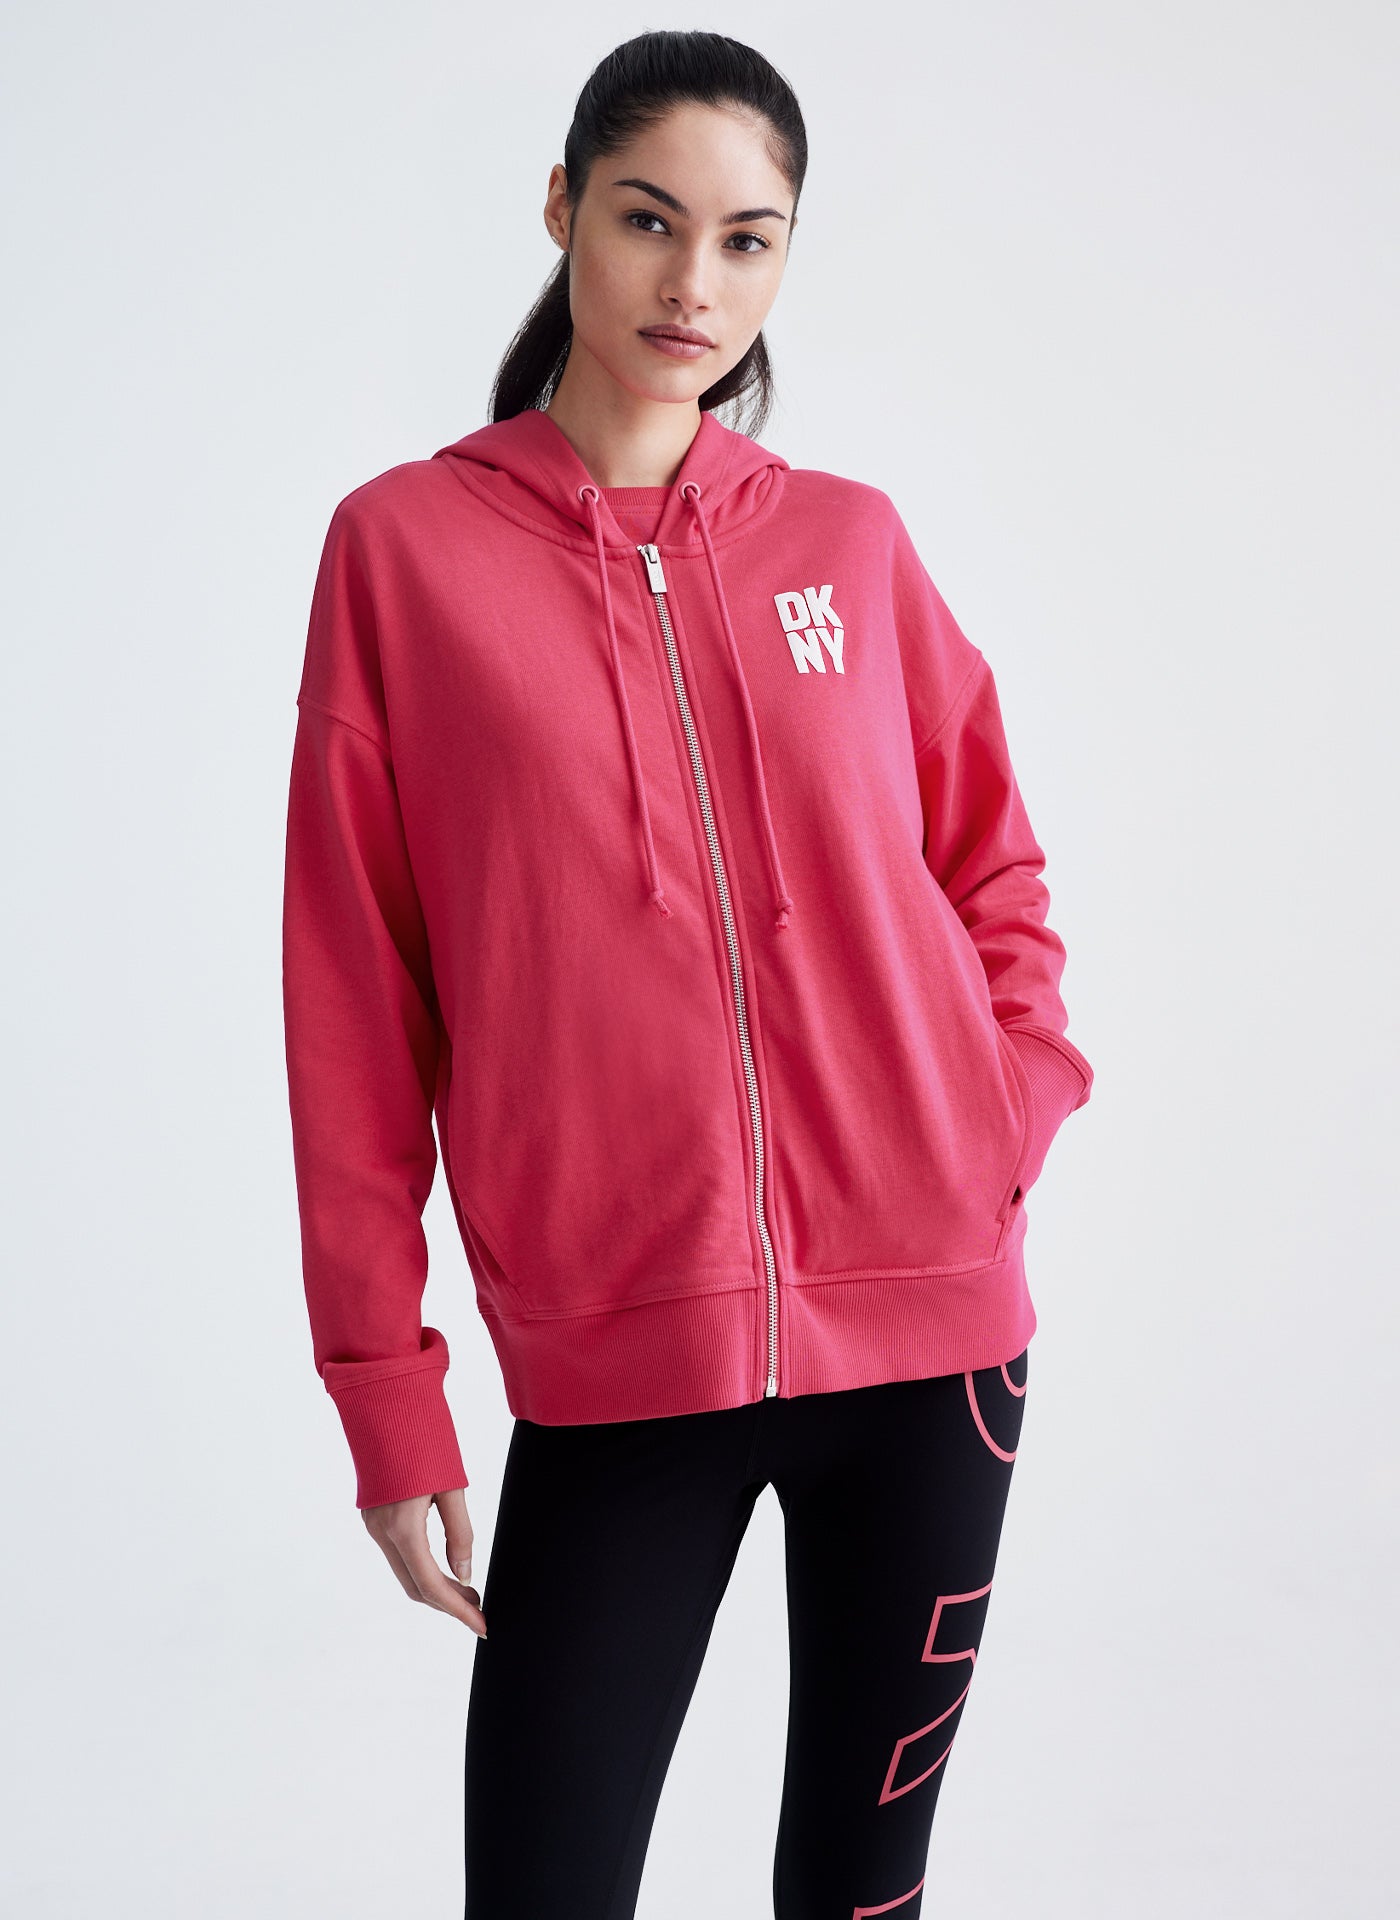 DKNY PUFF LOGO FULL ZIP HOODIE WITH POCKETS,Pink